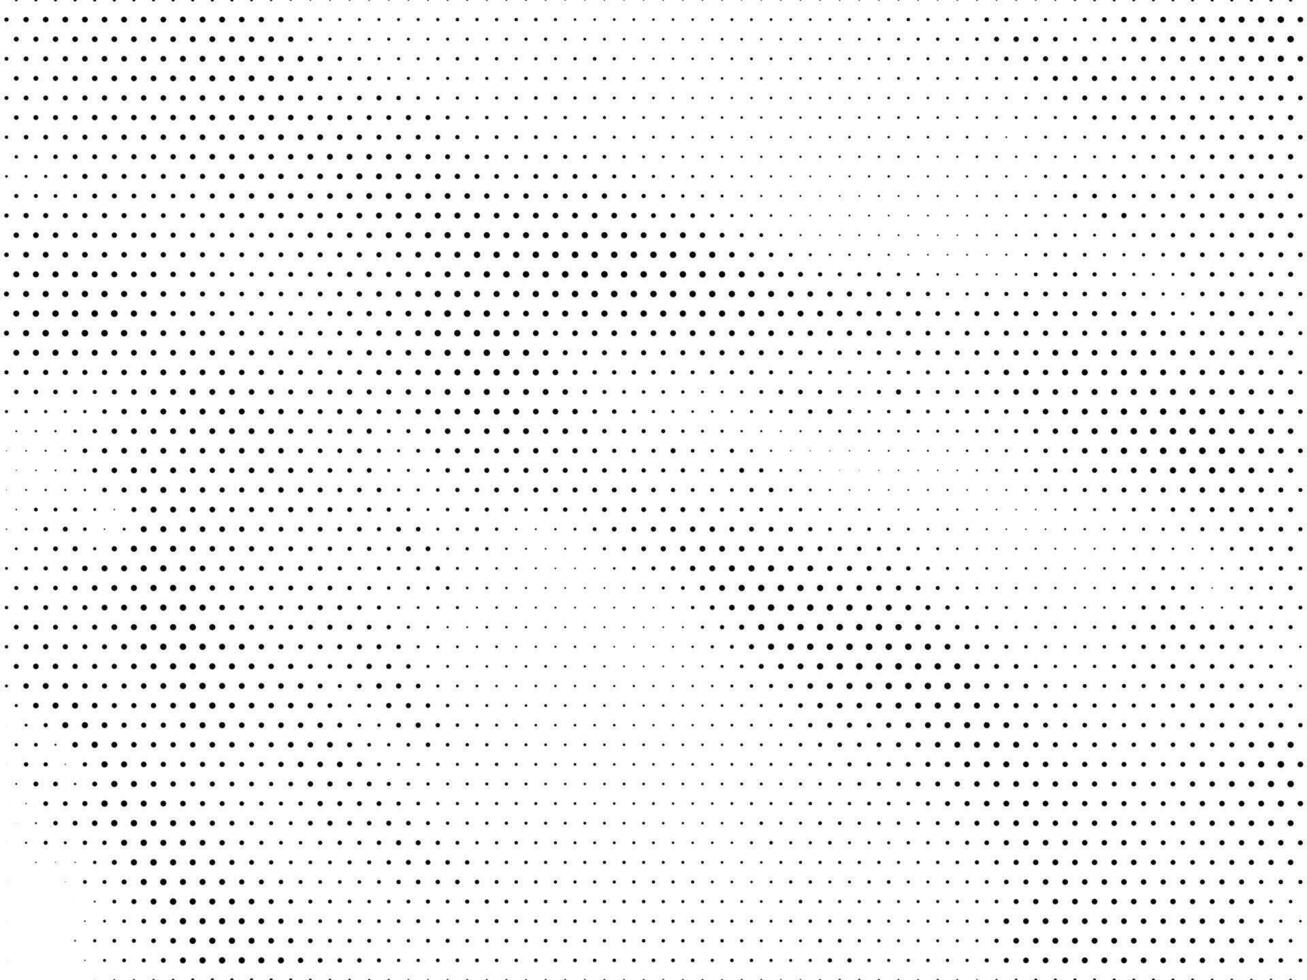 Abstract halftone design decorative background vector